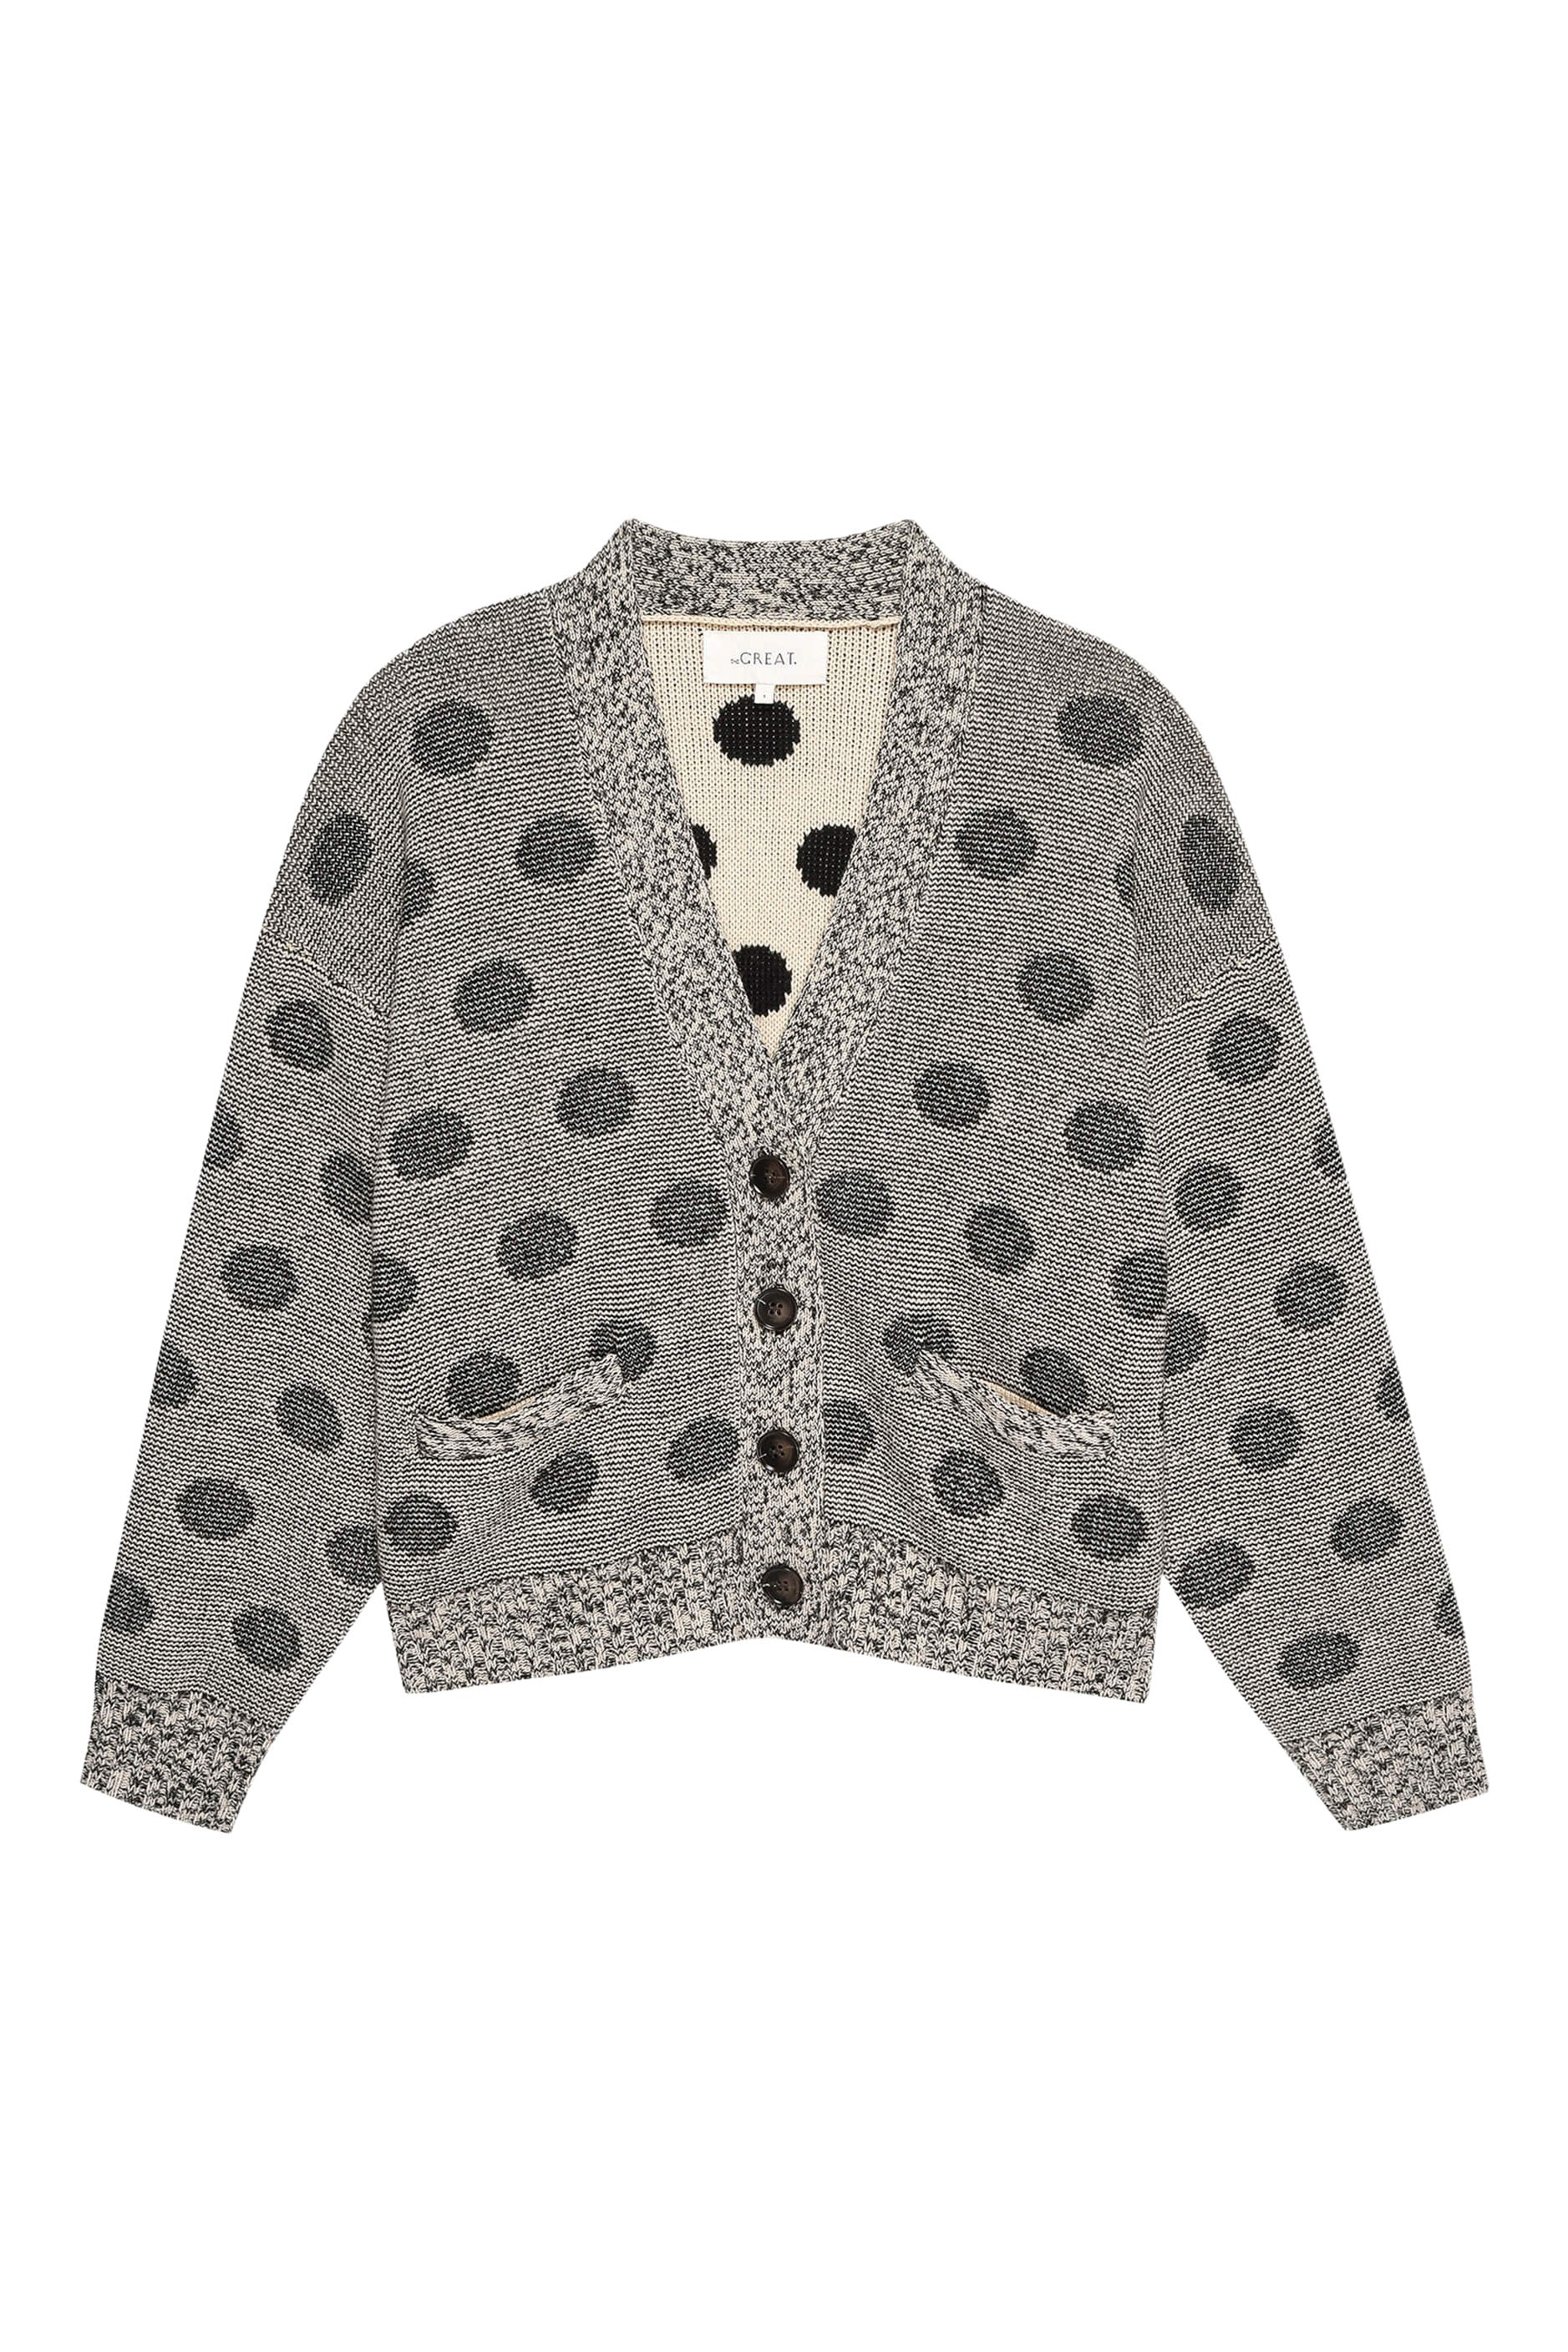 The Great Slouch Cardigan in Licorice Polka Dot